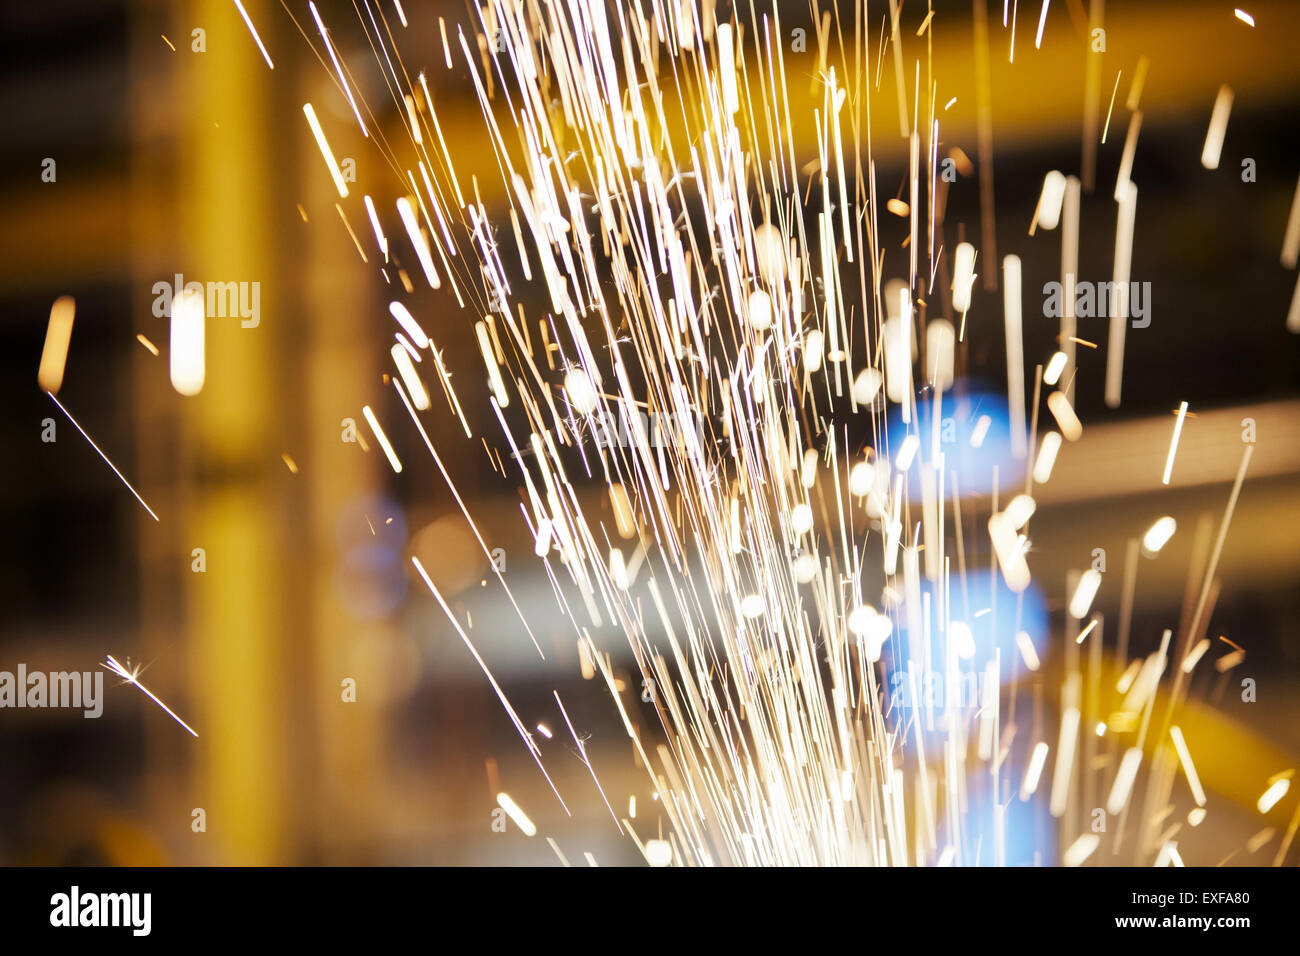 Sparks flying in factory Stock Photo